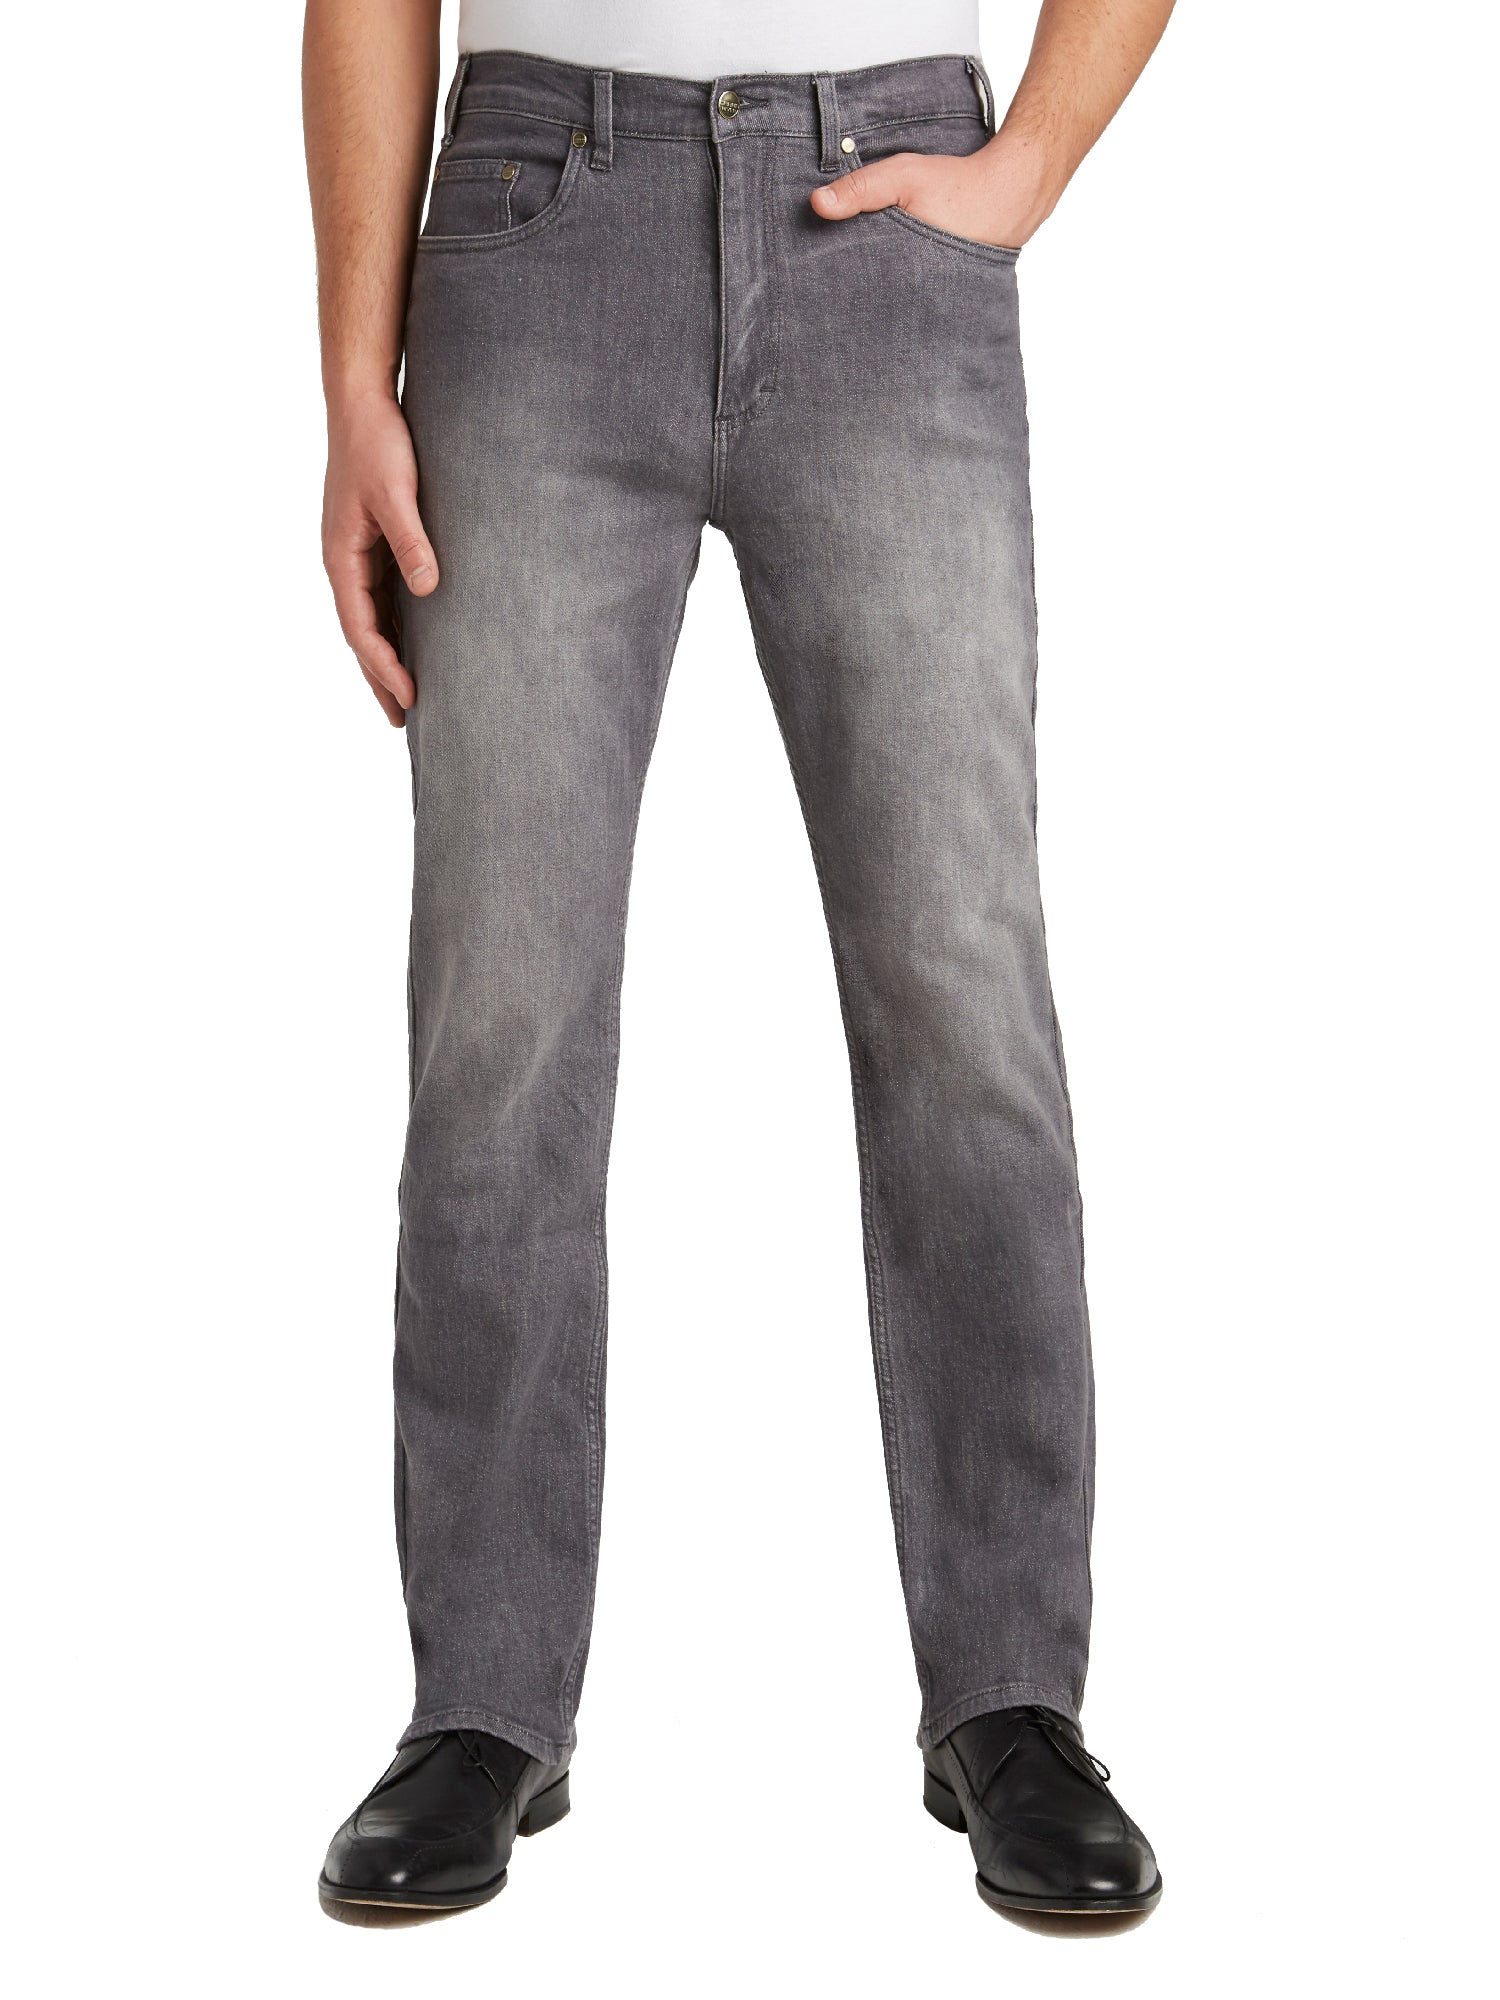 Grand River Marina Collection Stretch Jeans in Grey - Regular Sizes